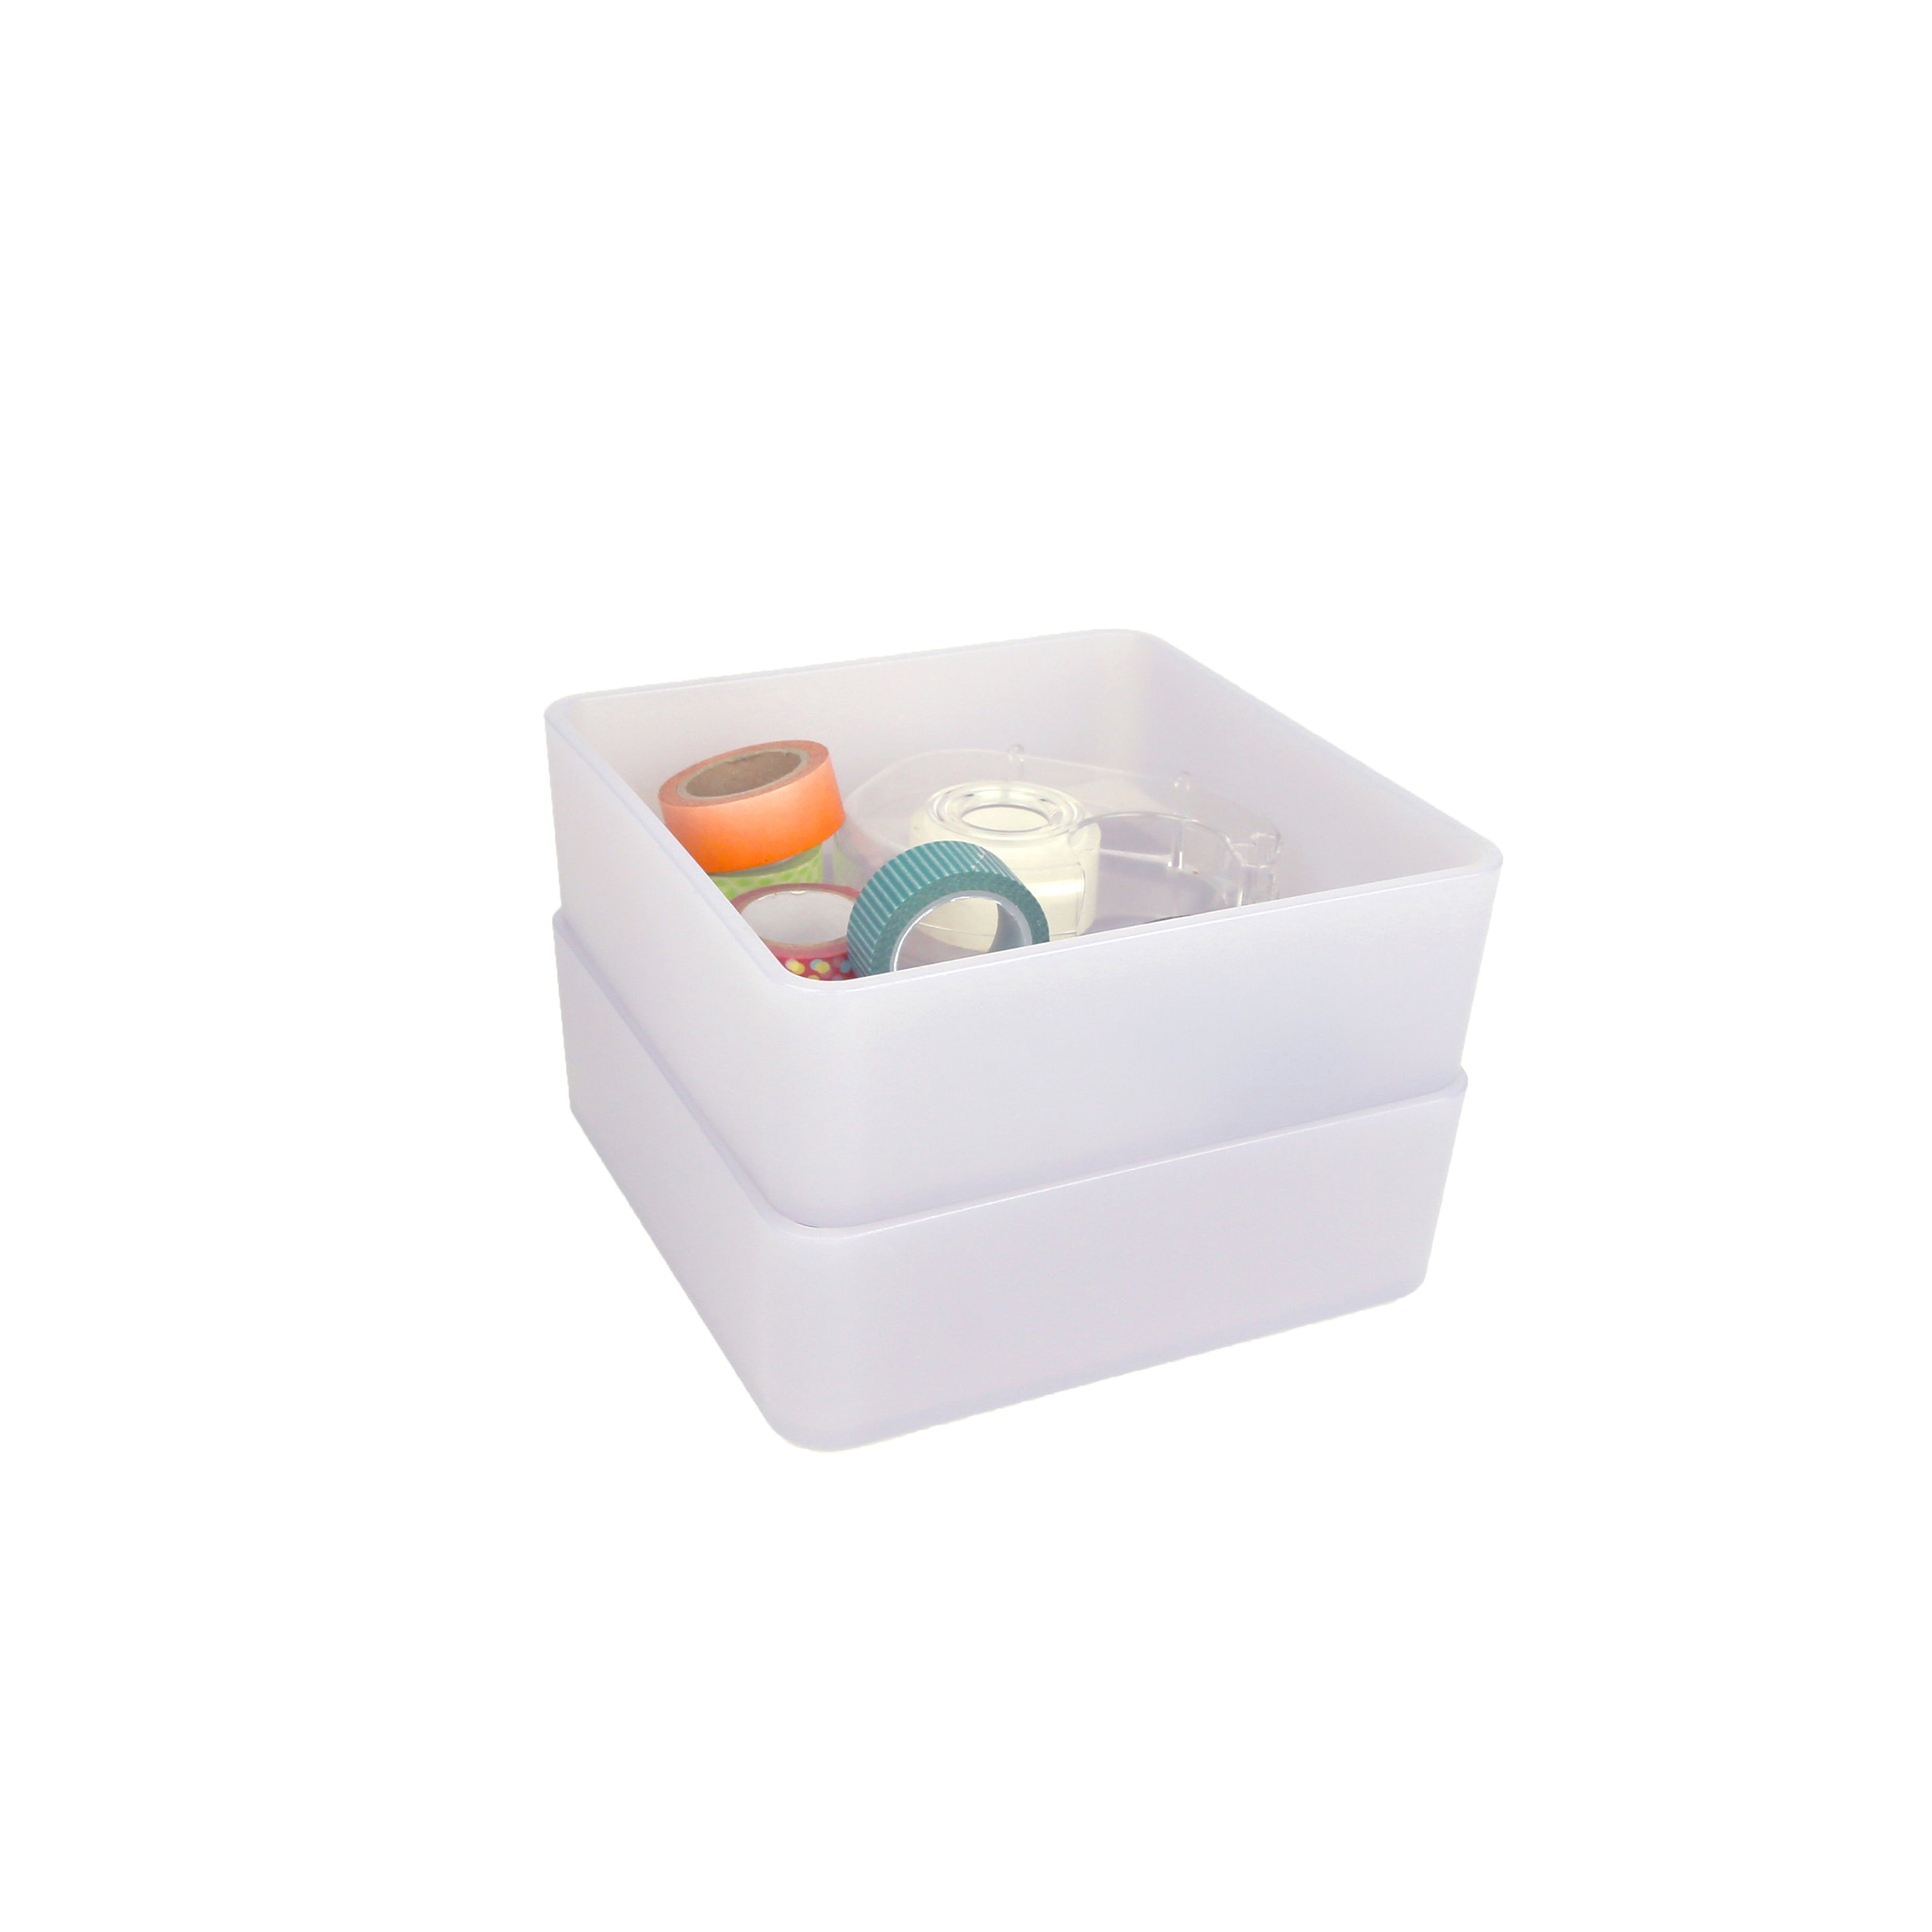 reSTAK recycled stackable organizing bins sets of 2 SMALL